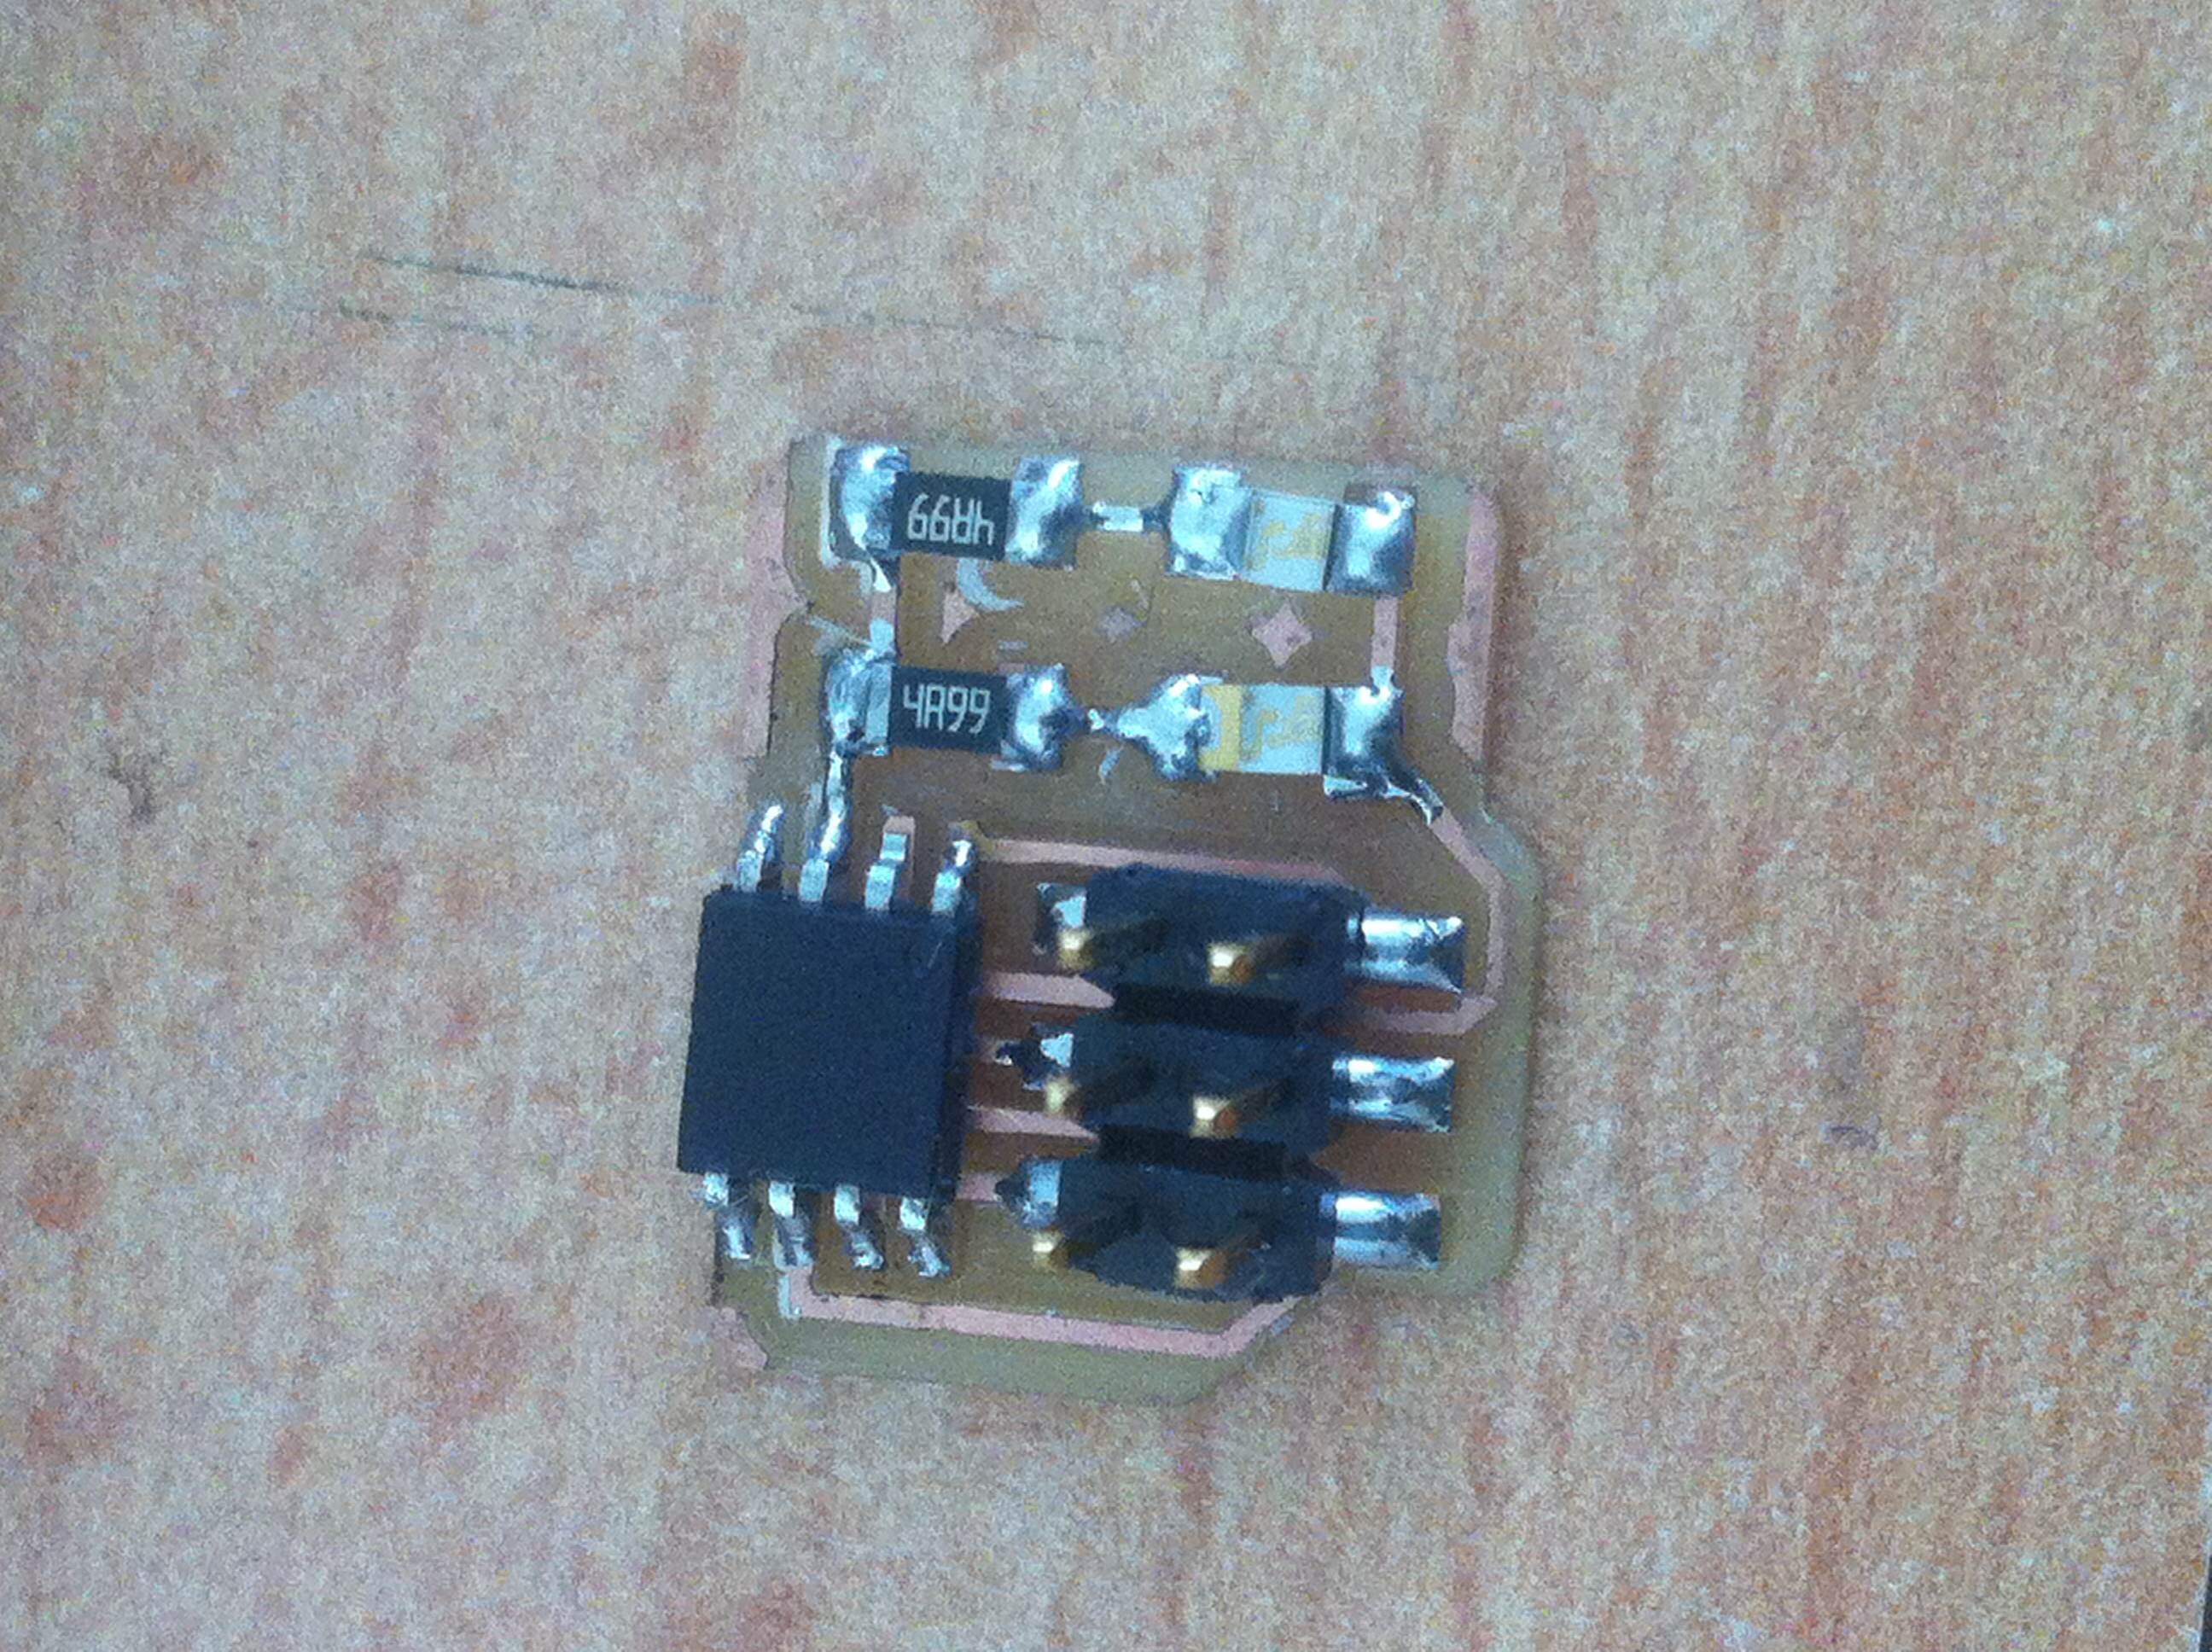 Img: output soldered board